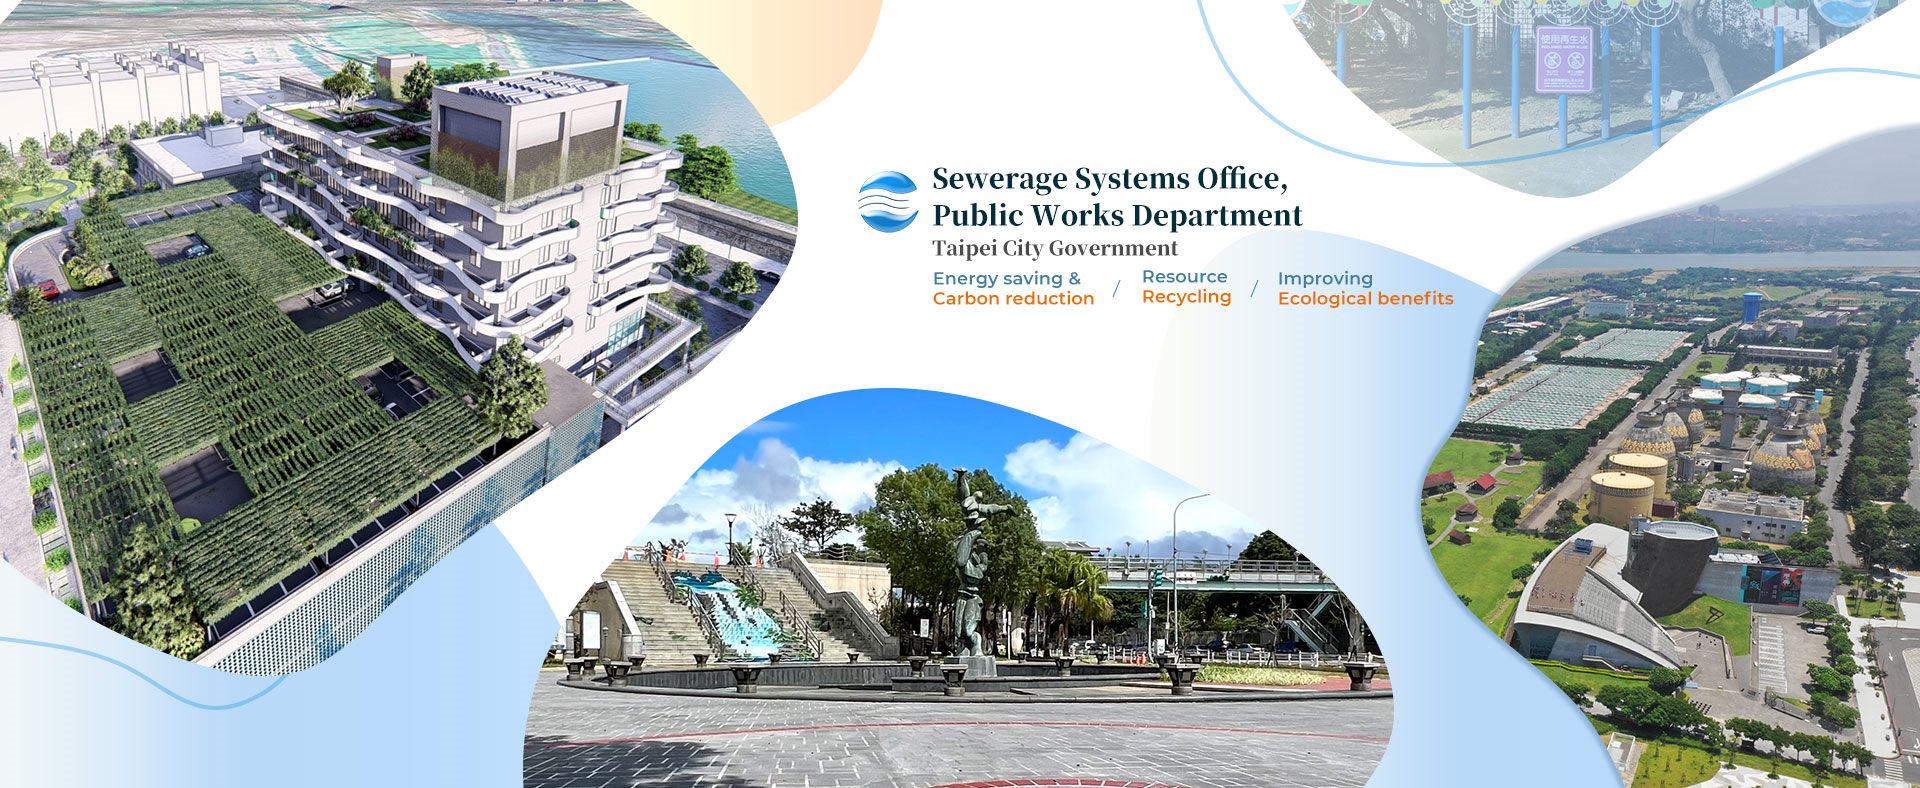 Sewerage Systems Office